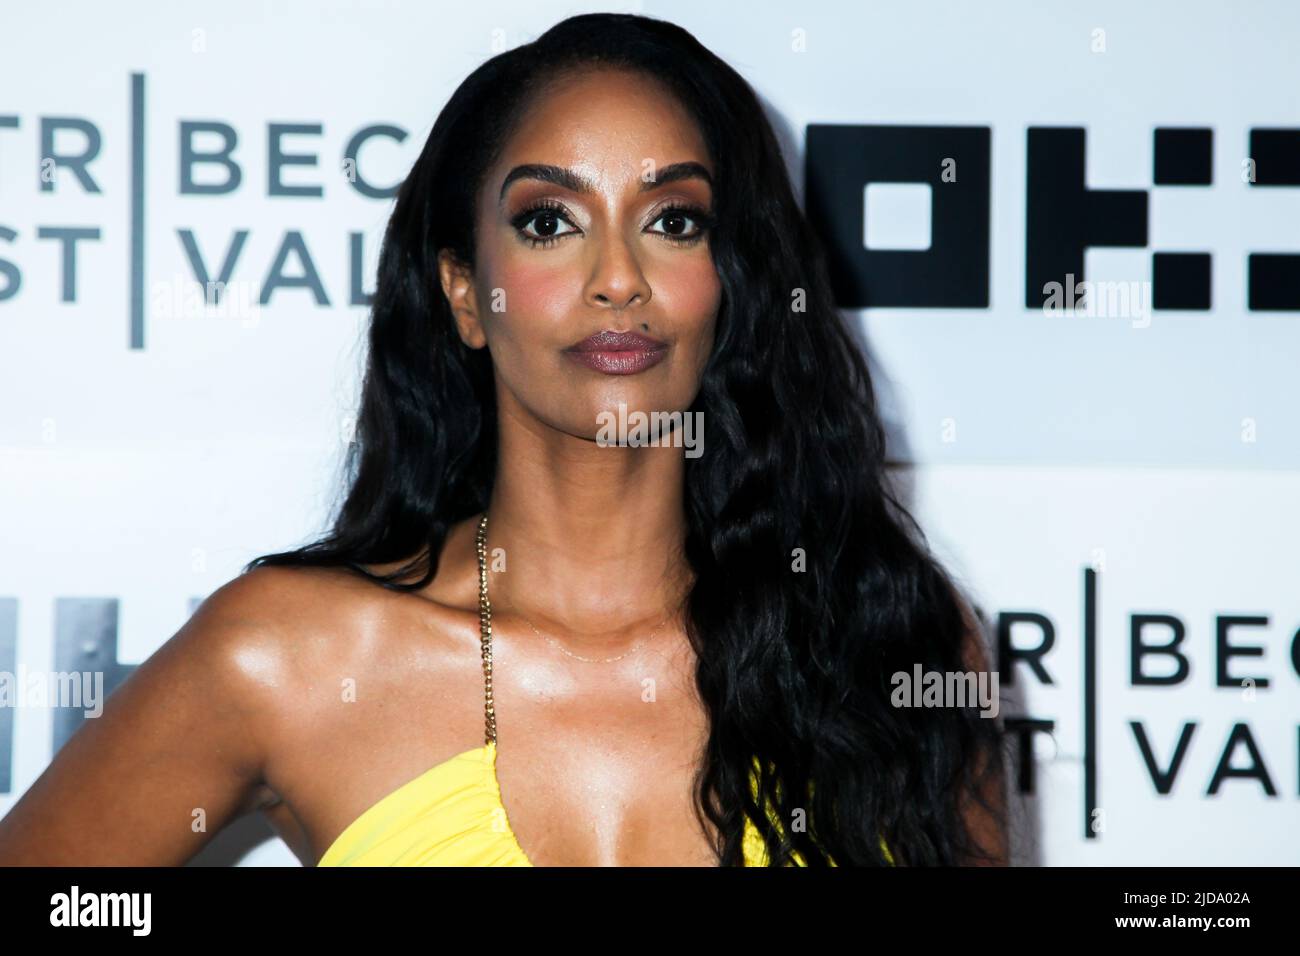 NEW YORK, NY, USA - 18. JUNI 2022: Azie Tesfai nimmt an der Weltpremiere „Loudmouth“ 2022 Tribeca Film Festival im BMCC Tribeca Performing Arts Cent Teil Stockfoto